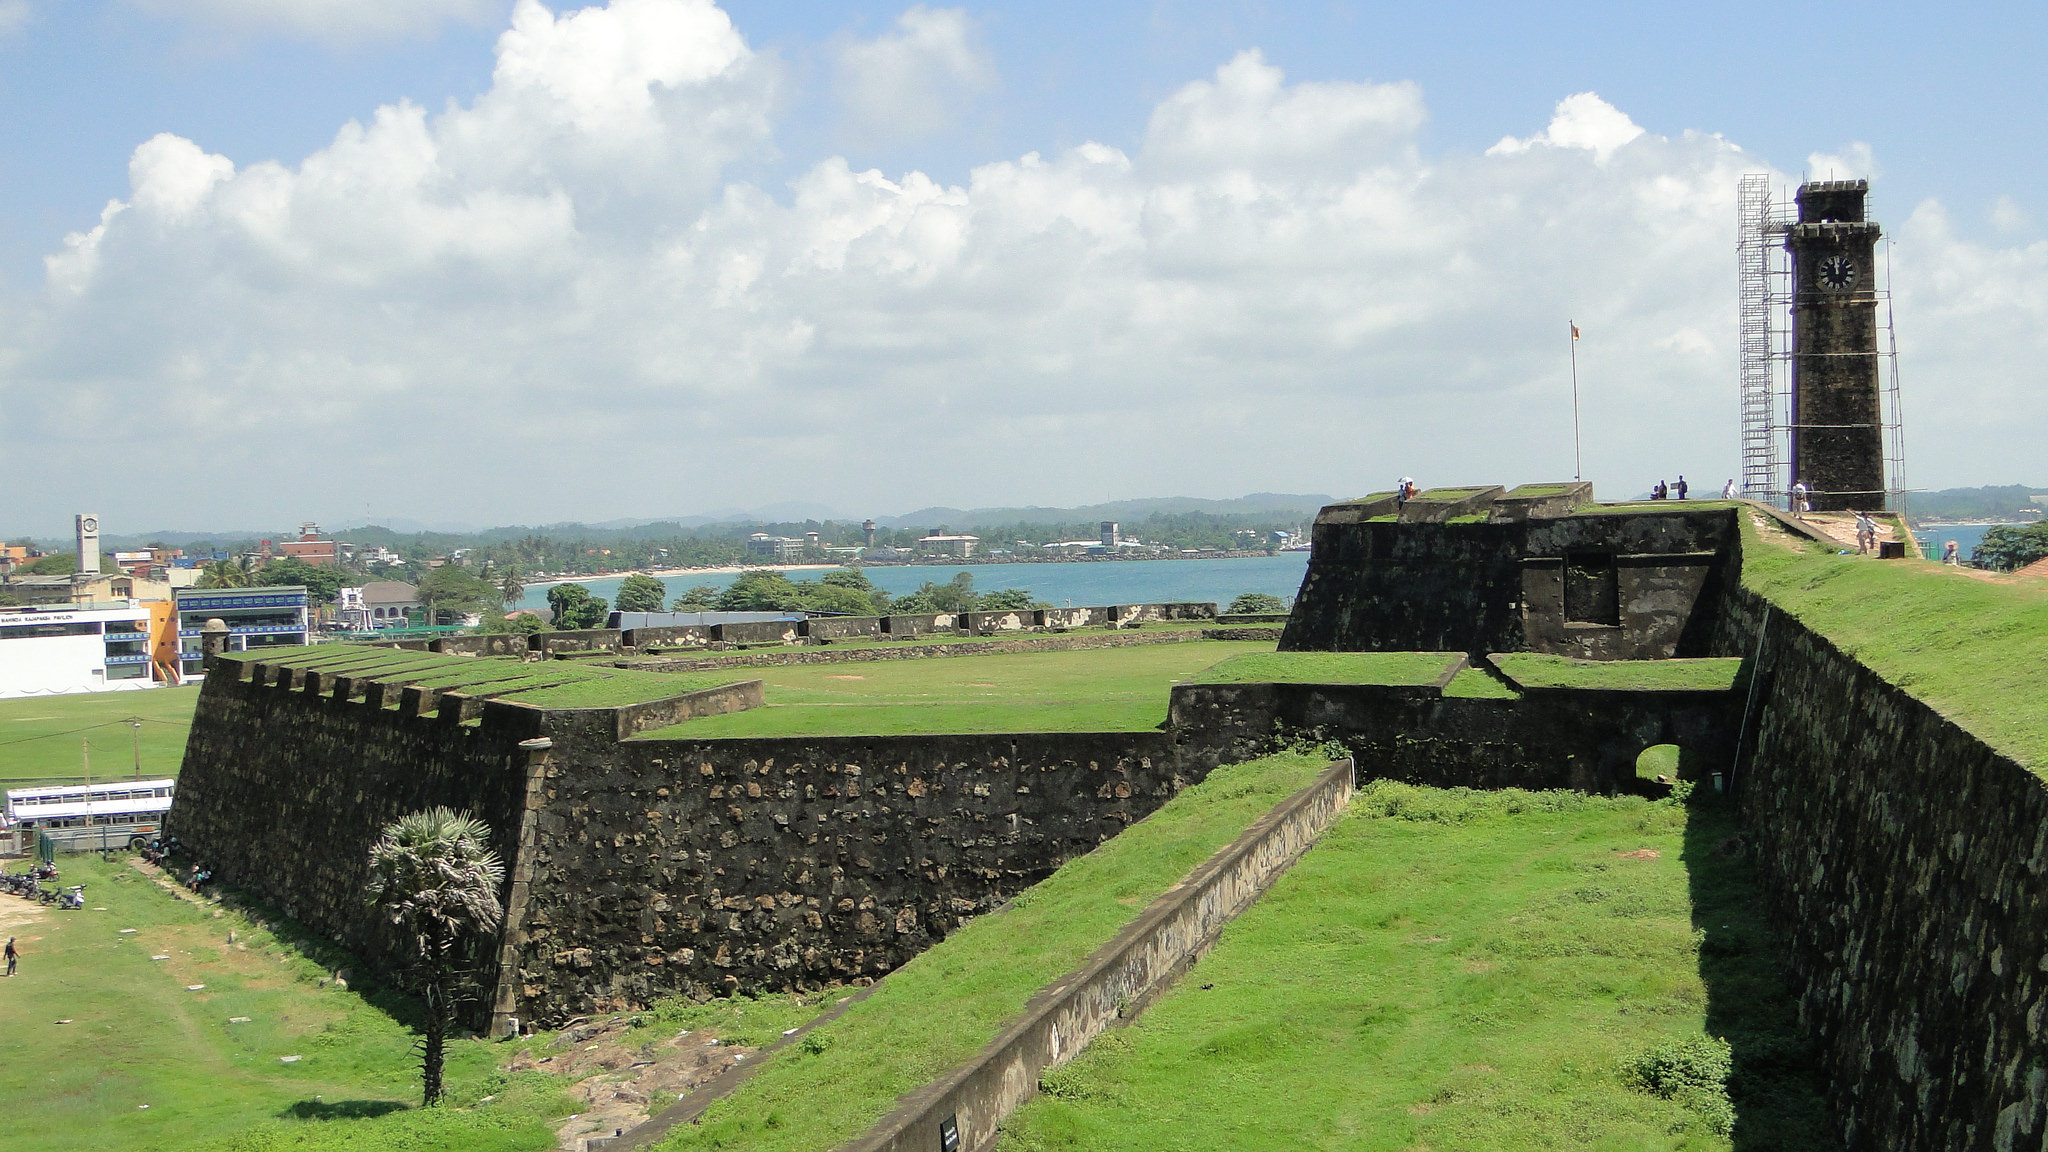 Galle Fort undergoes renovations – Preserving this historic site